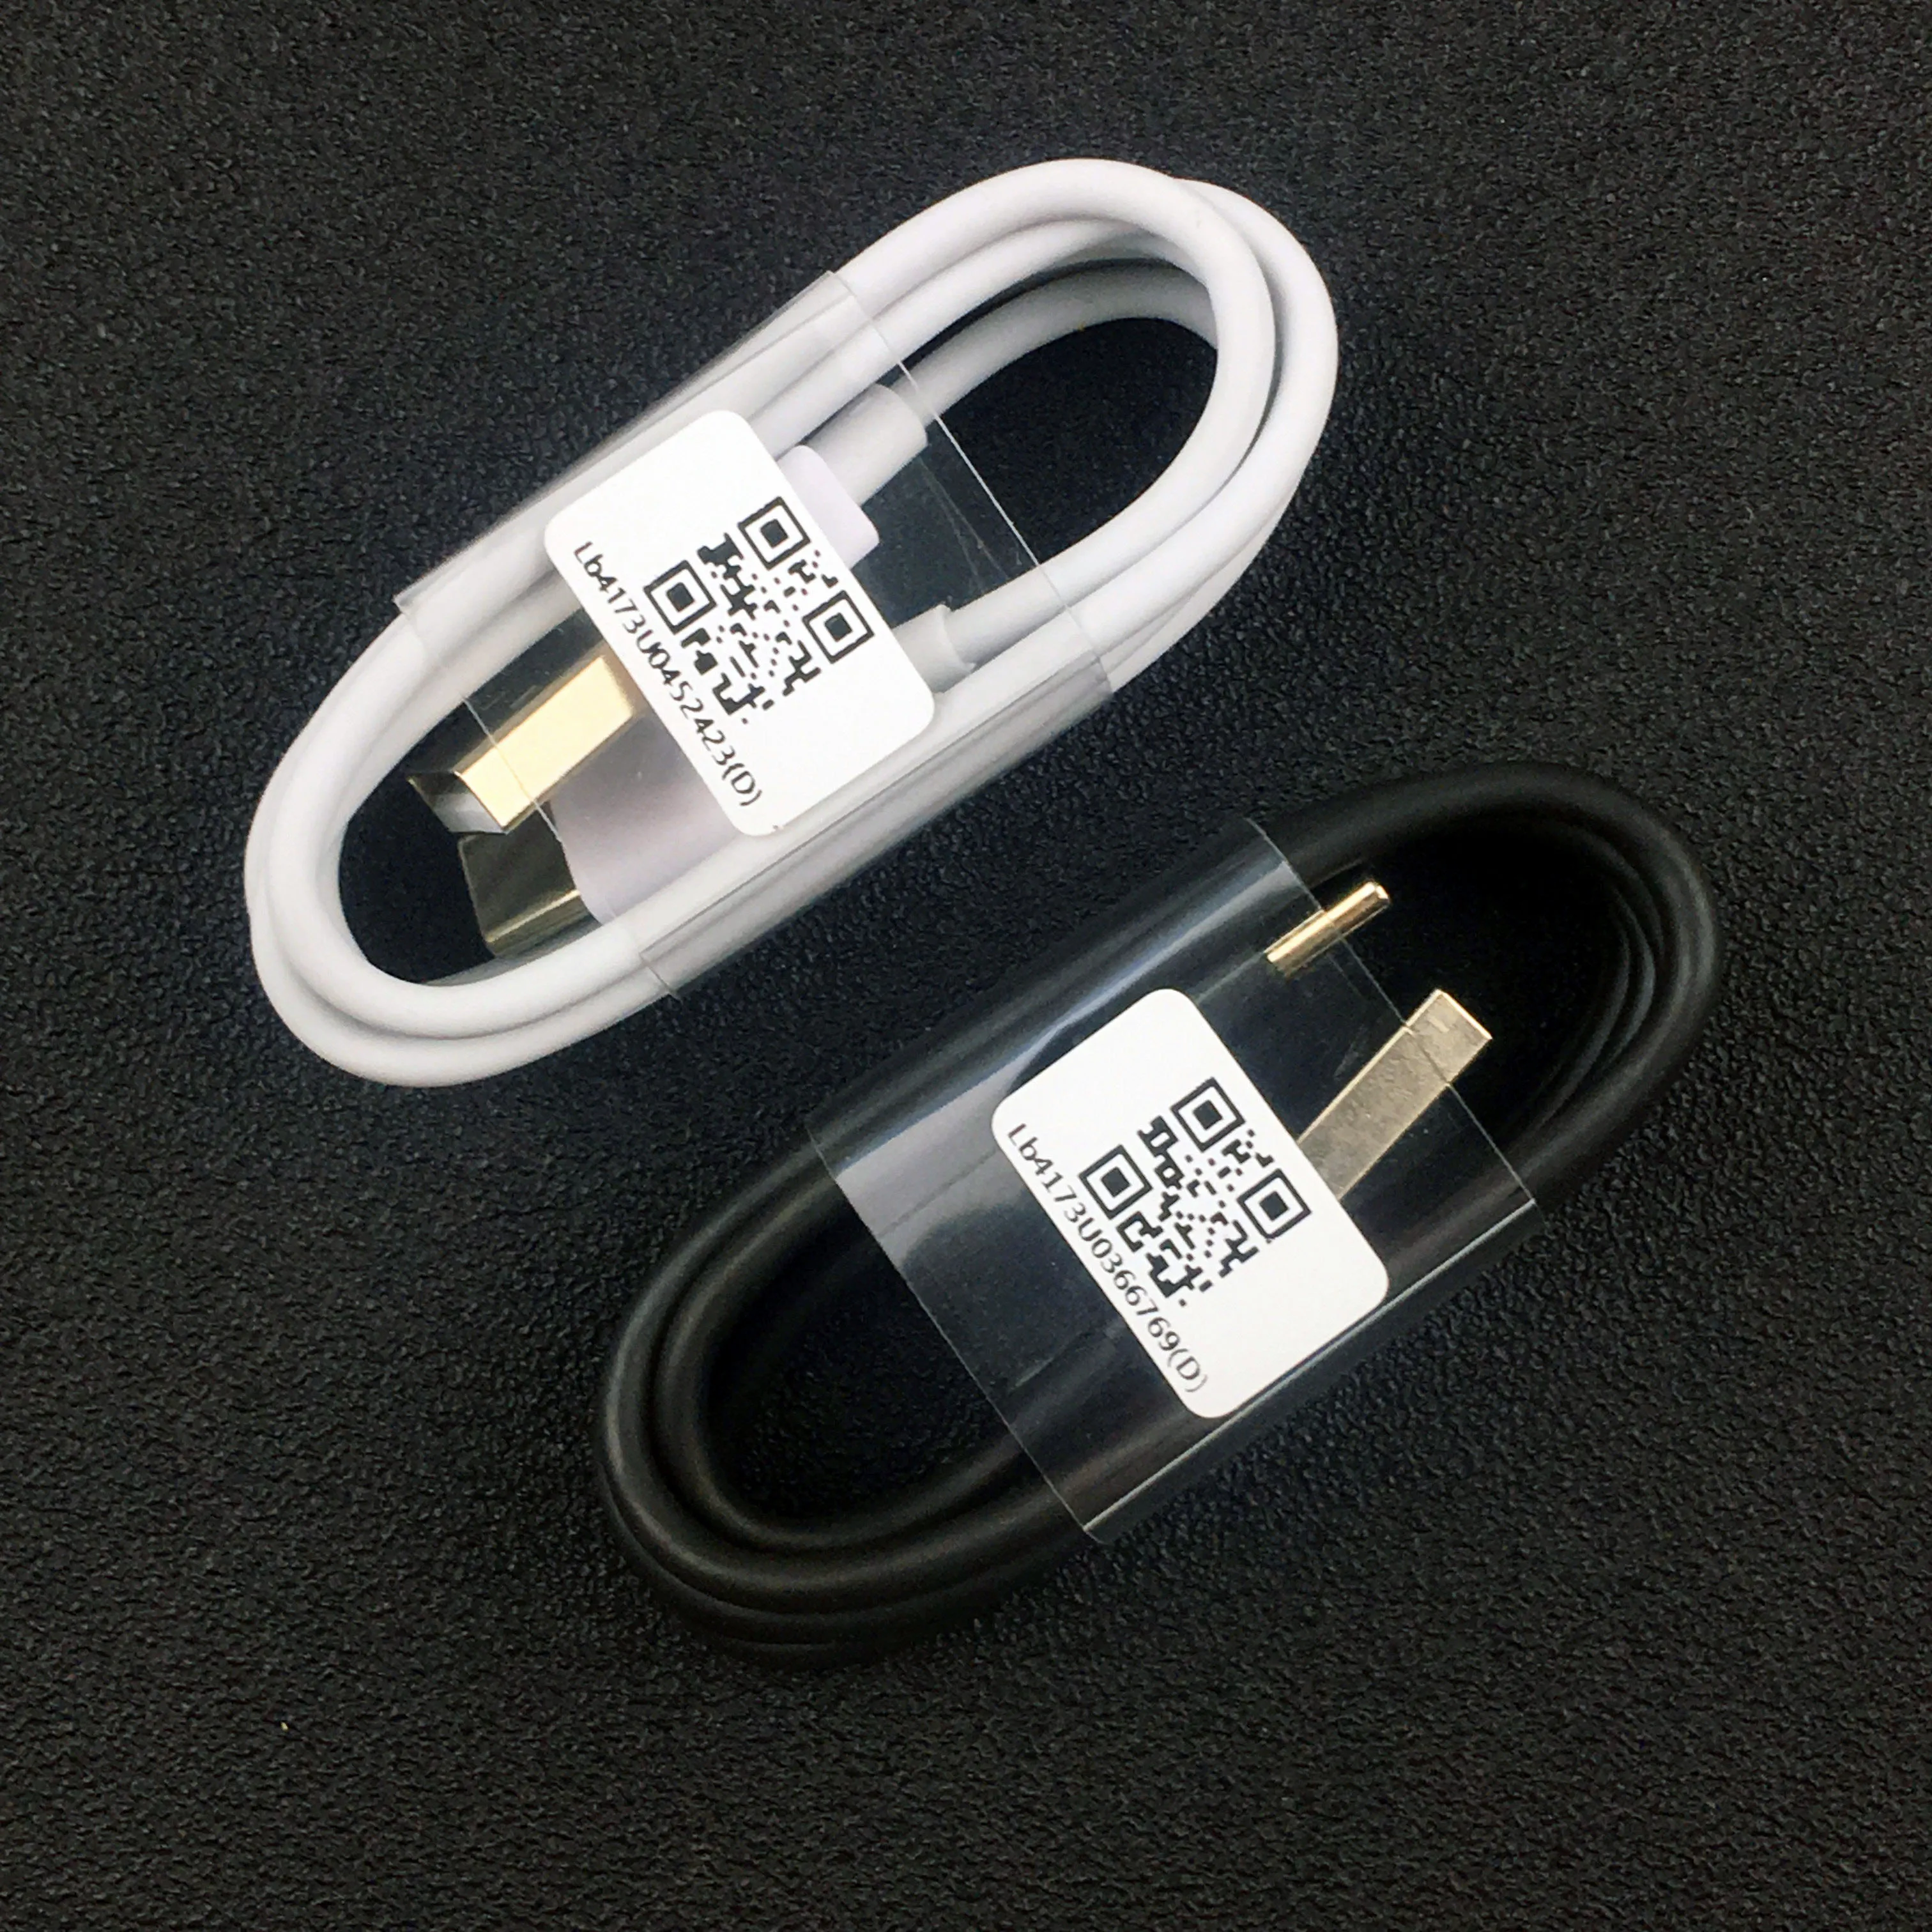 Фото Original Xiaomi Mi Max 3 Fast Charger cable For mi 9 se 8 6 6x redmi note 7 pro x max 2 s 100cm Type C Data Cable | Мобильные